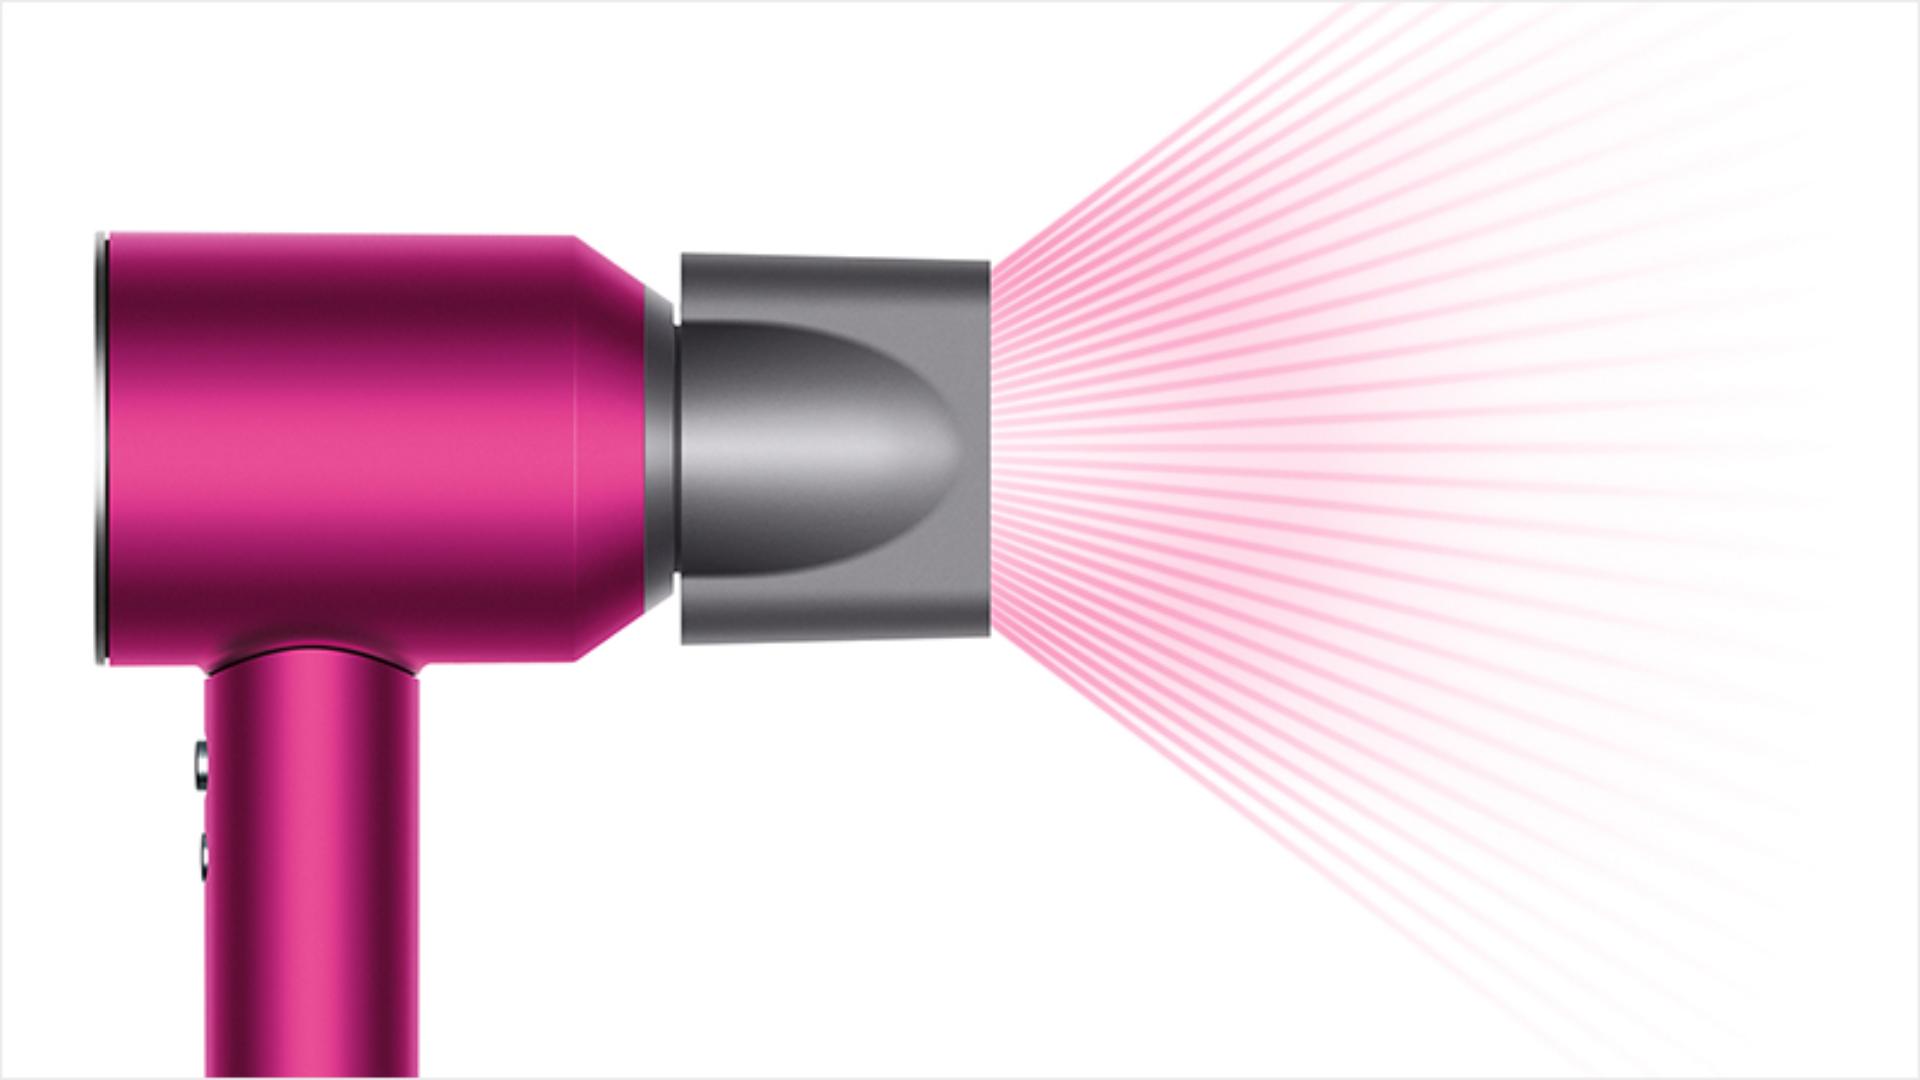 Dyson Supersonic™ hair dryer Iron/Fuchsia with Smoothing nozzle